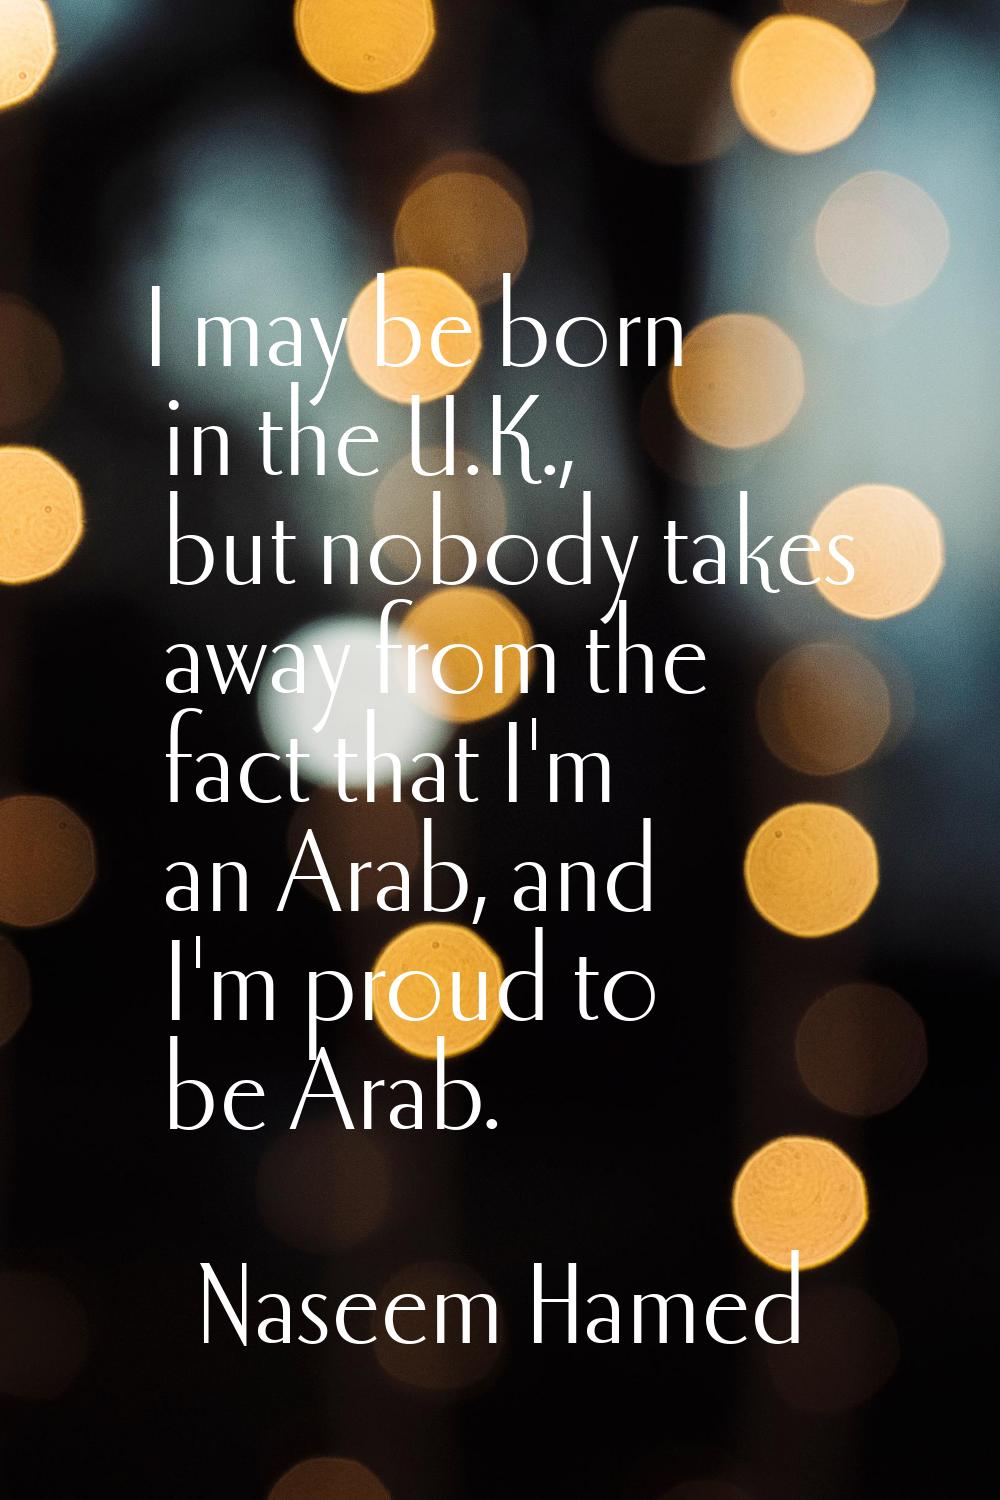 I may be born in the U.K., but nobody takes away from the fact that I'm an Arab, and I'm proud to b